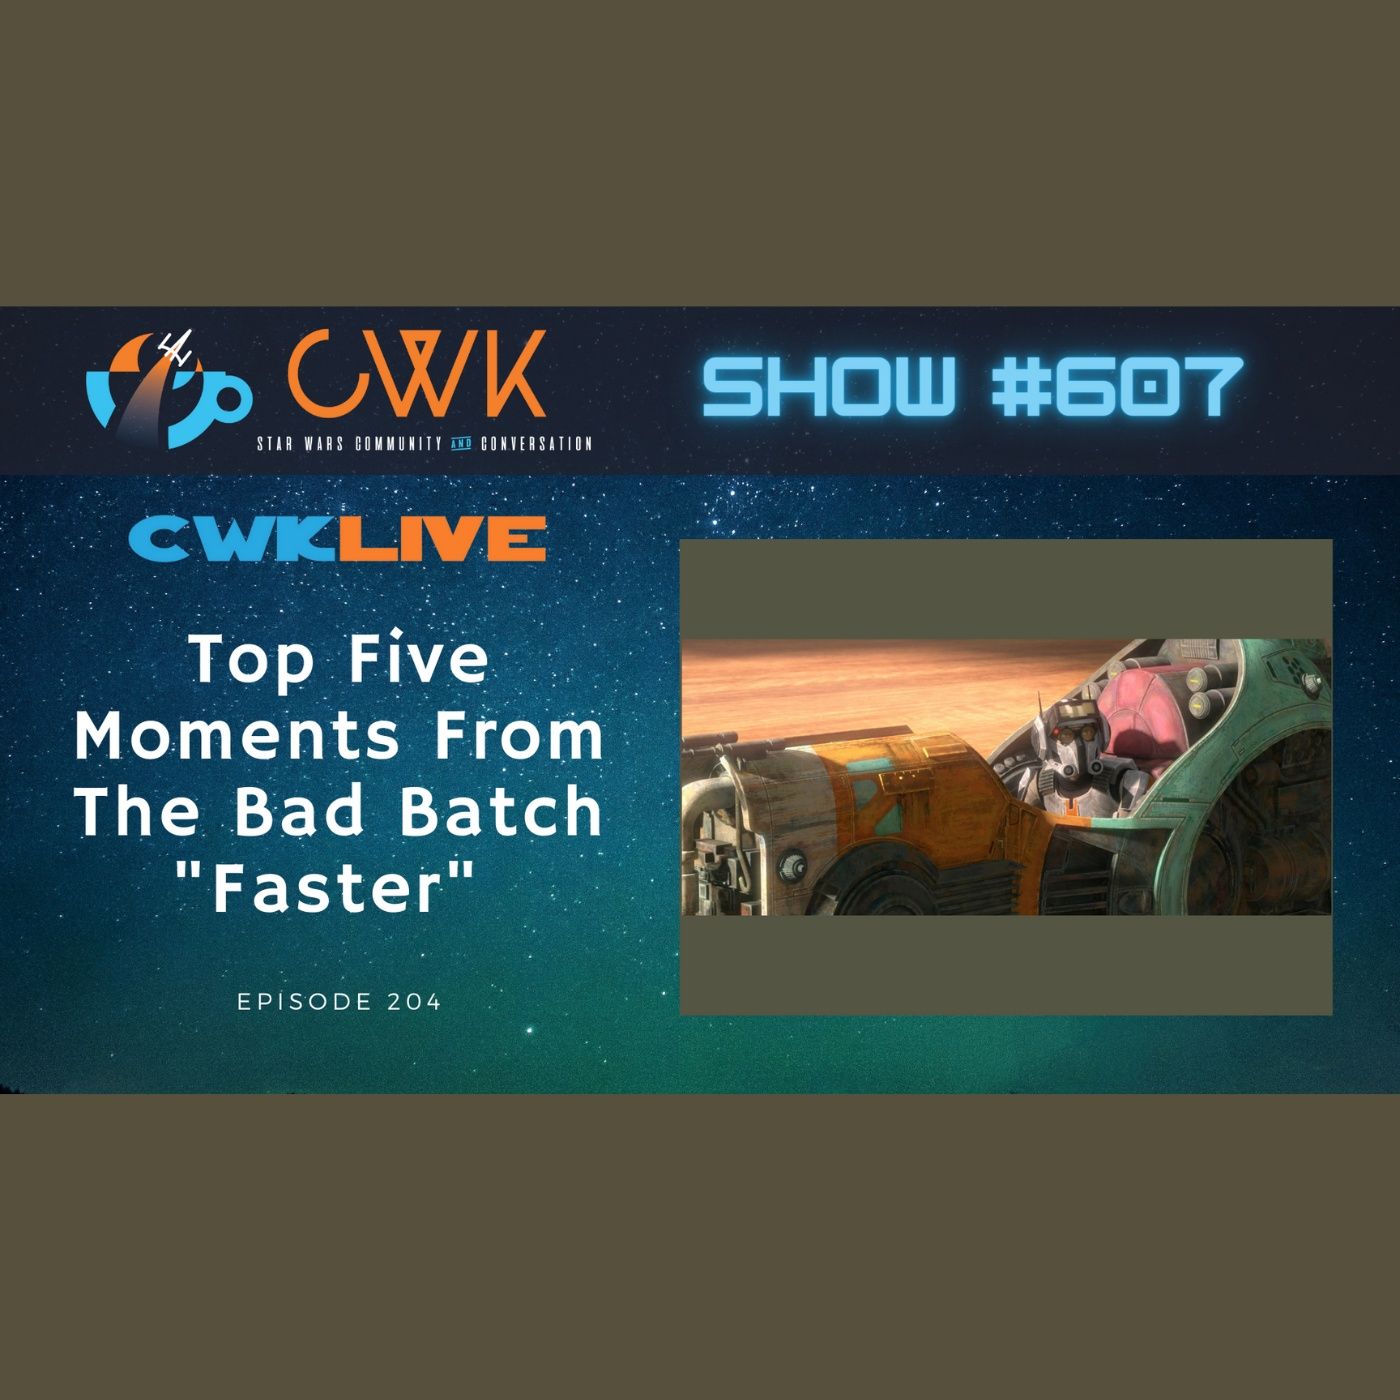 CWK Show #607 LIVE: Top Five Moments From The Bad Batch 